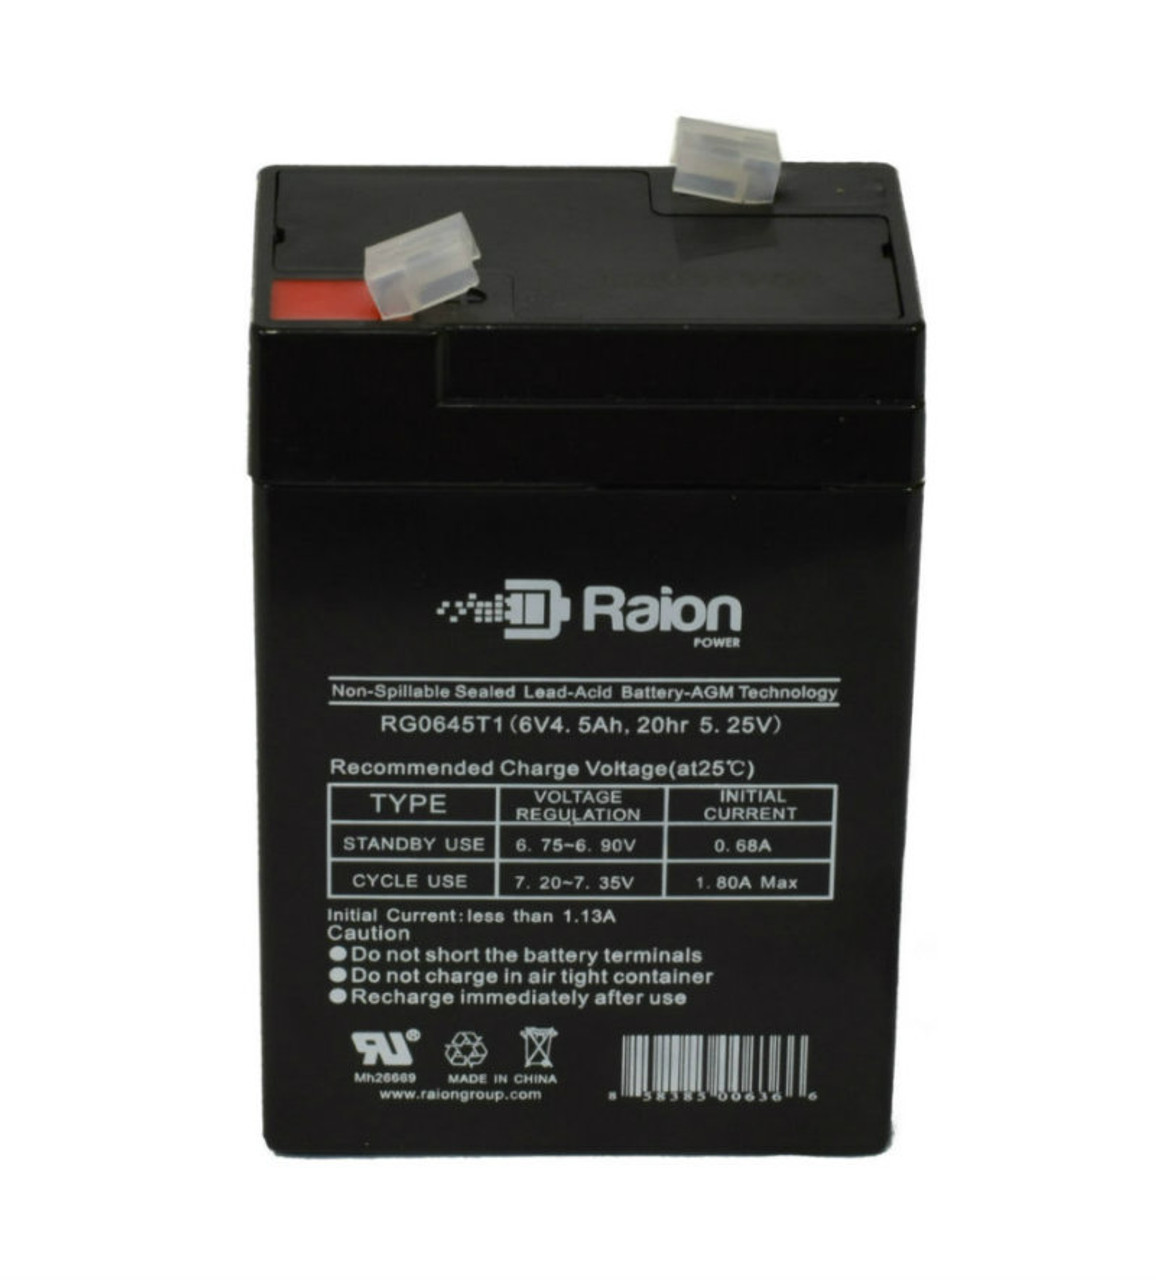 Raion Power RG0645T1 Replacement Battery Cartridge for Sheng Yang SY640